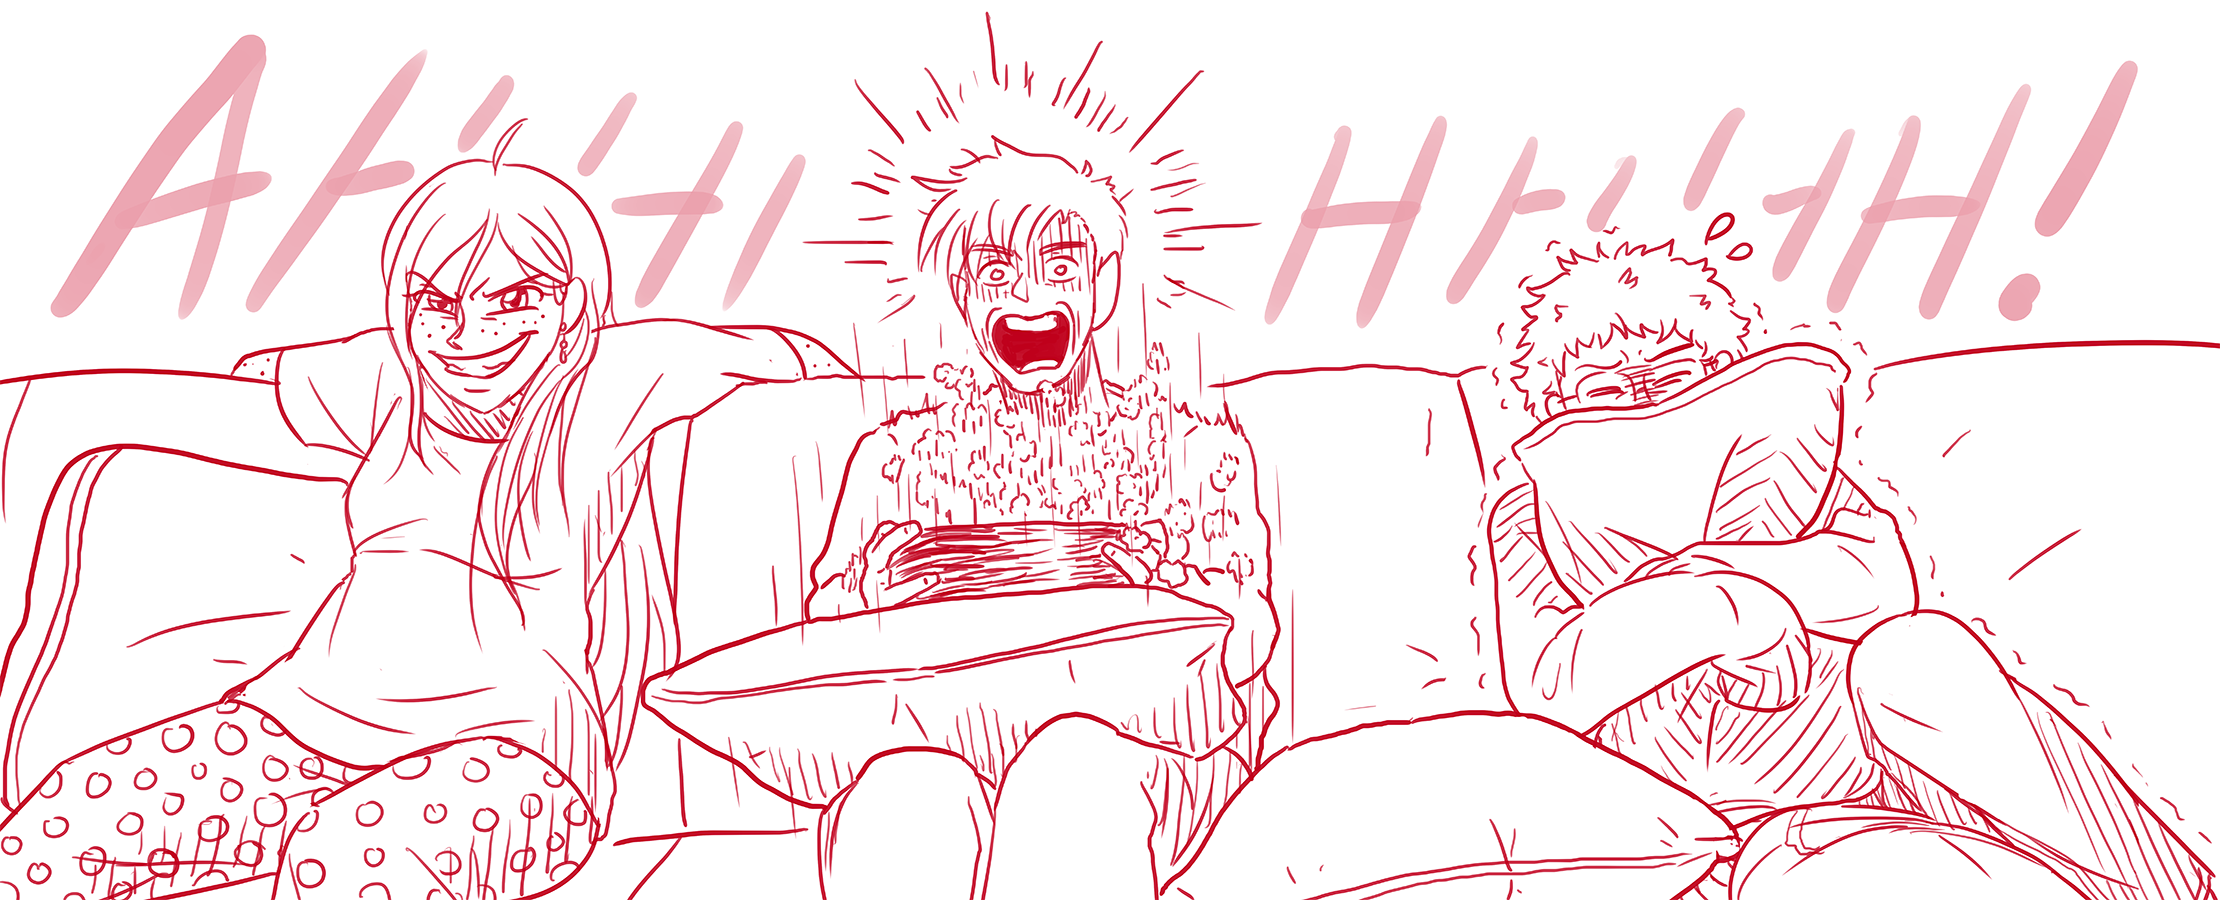 Three people on a couch watching a television out of view. The girl grins mischeviously with both arms hanging across over the couch. The boy in the middle screams, popcorn in the bowl across his lap flying into the air. Next to him, the other boy hides behind a pillow in terror.